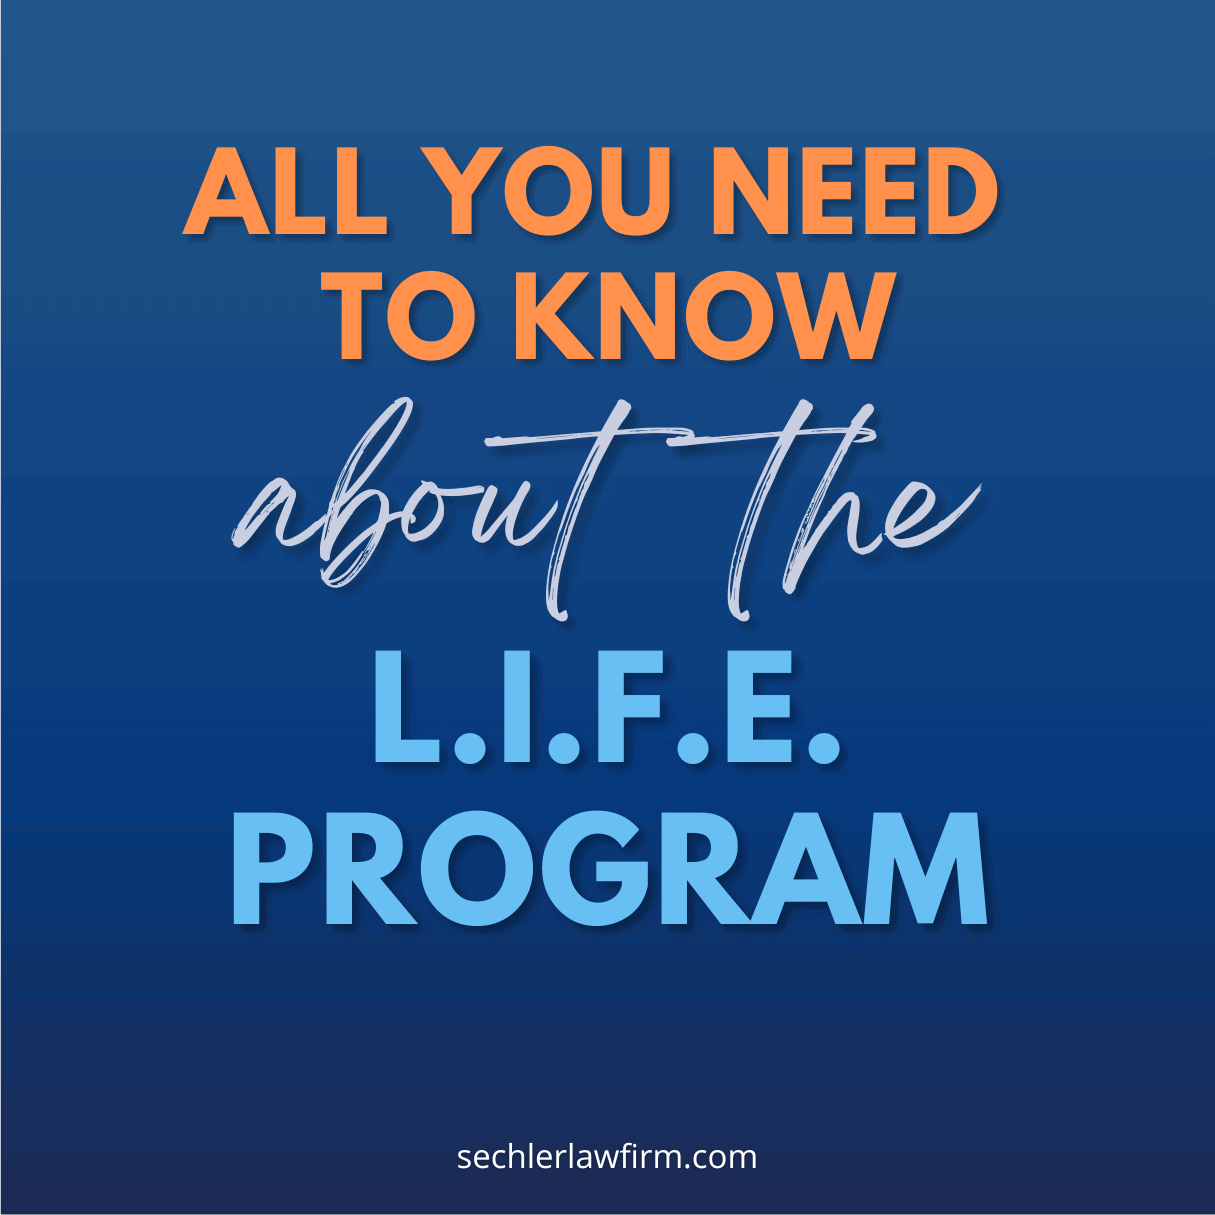 All You Need to Know about The LIFE Program